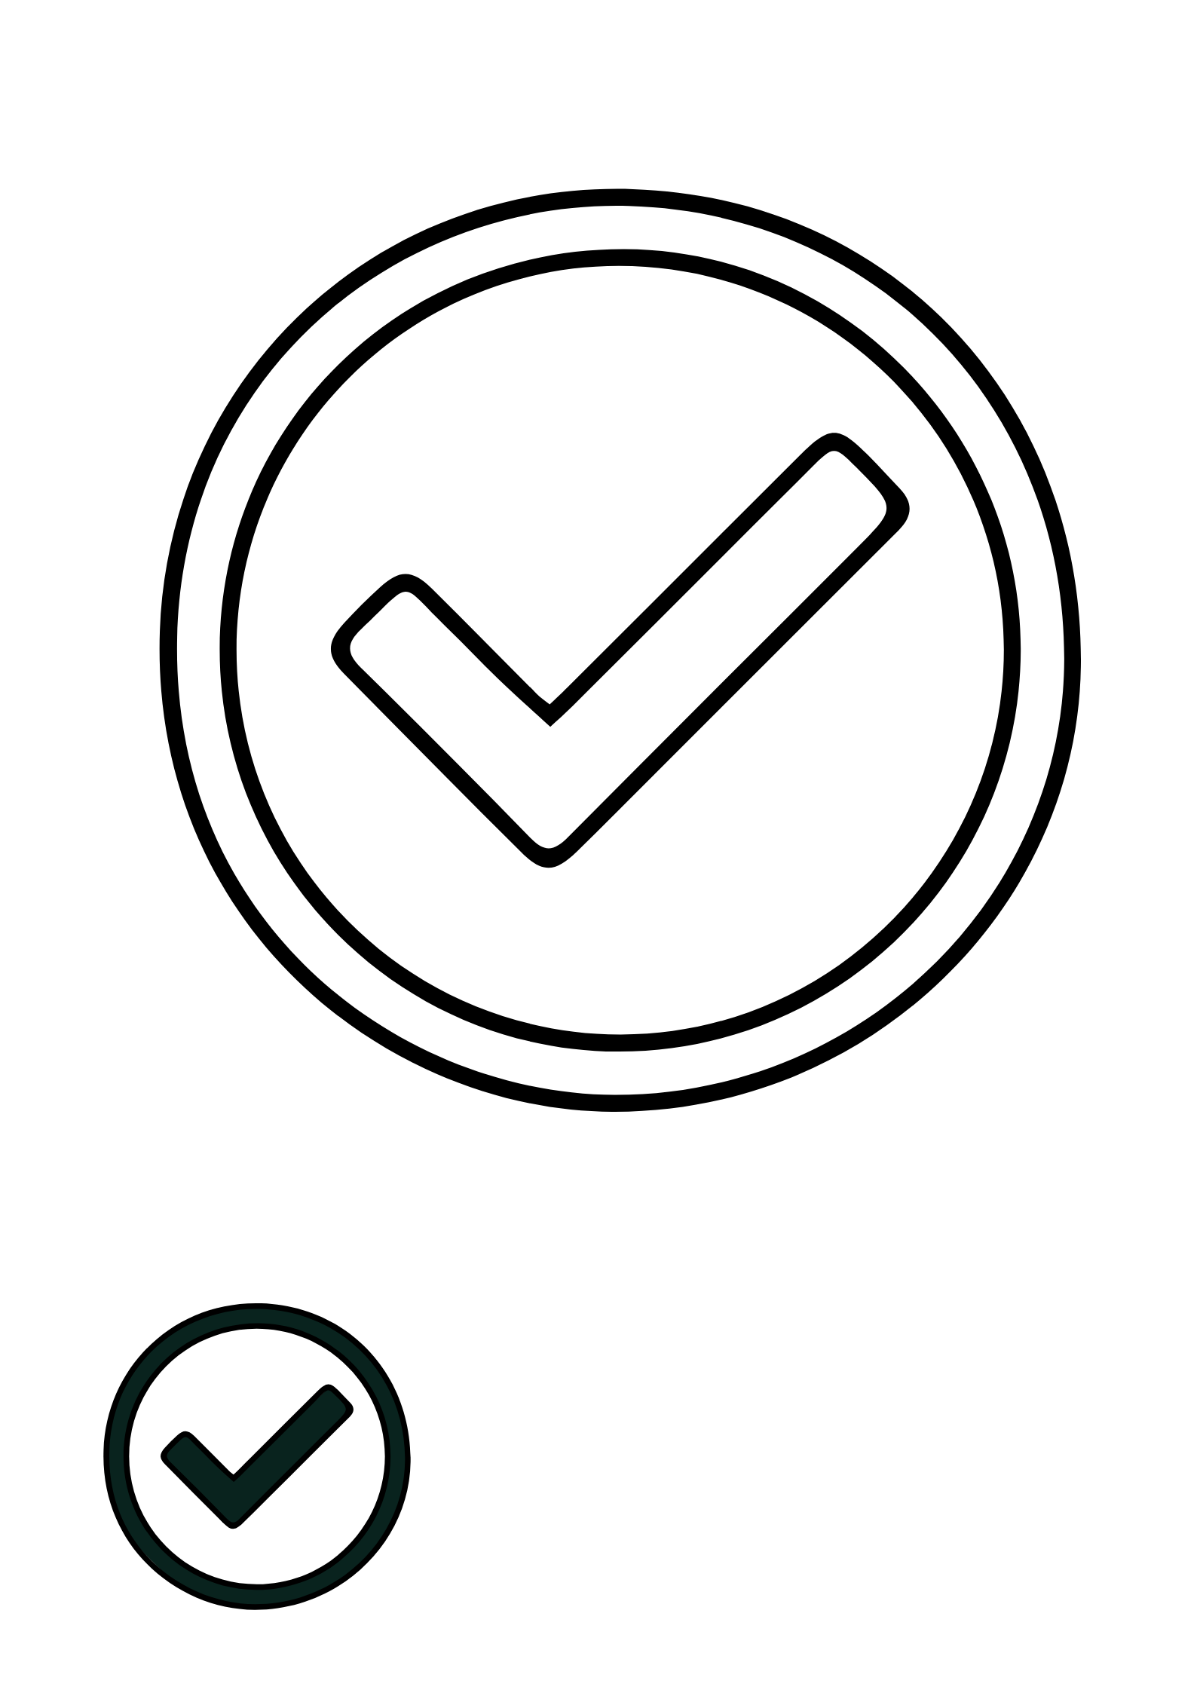 Check Mark Outline coloring page Template